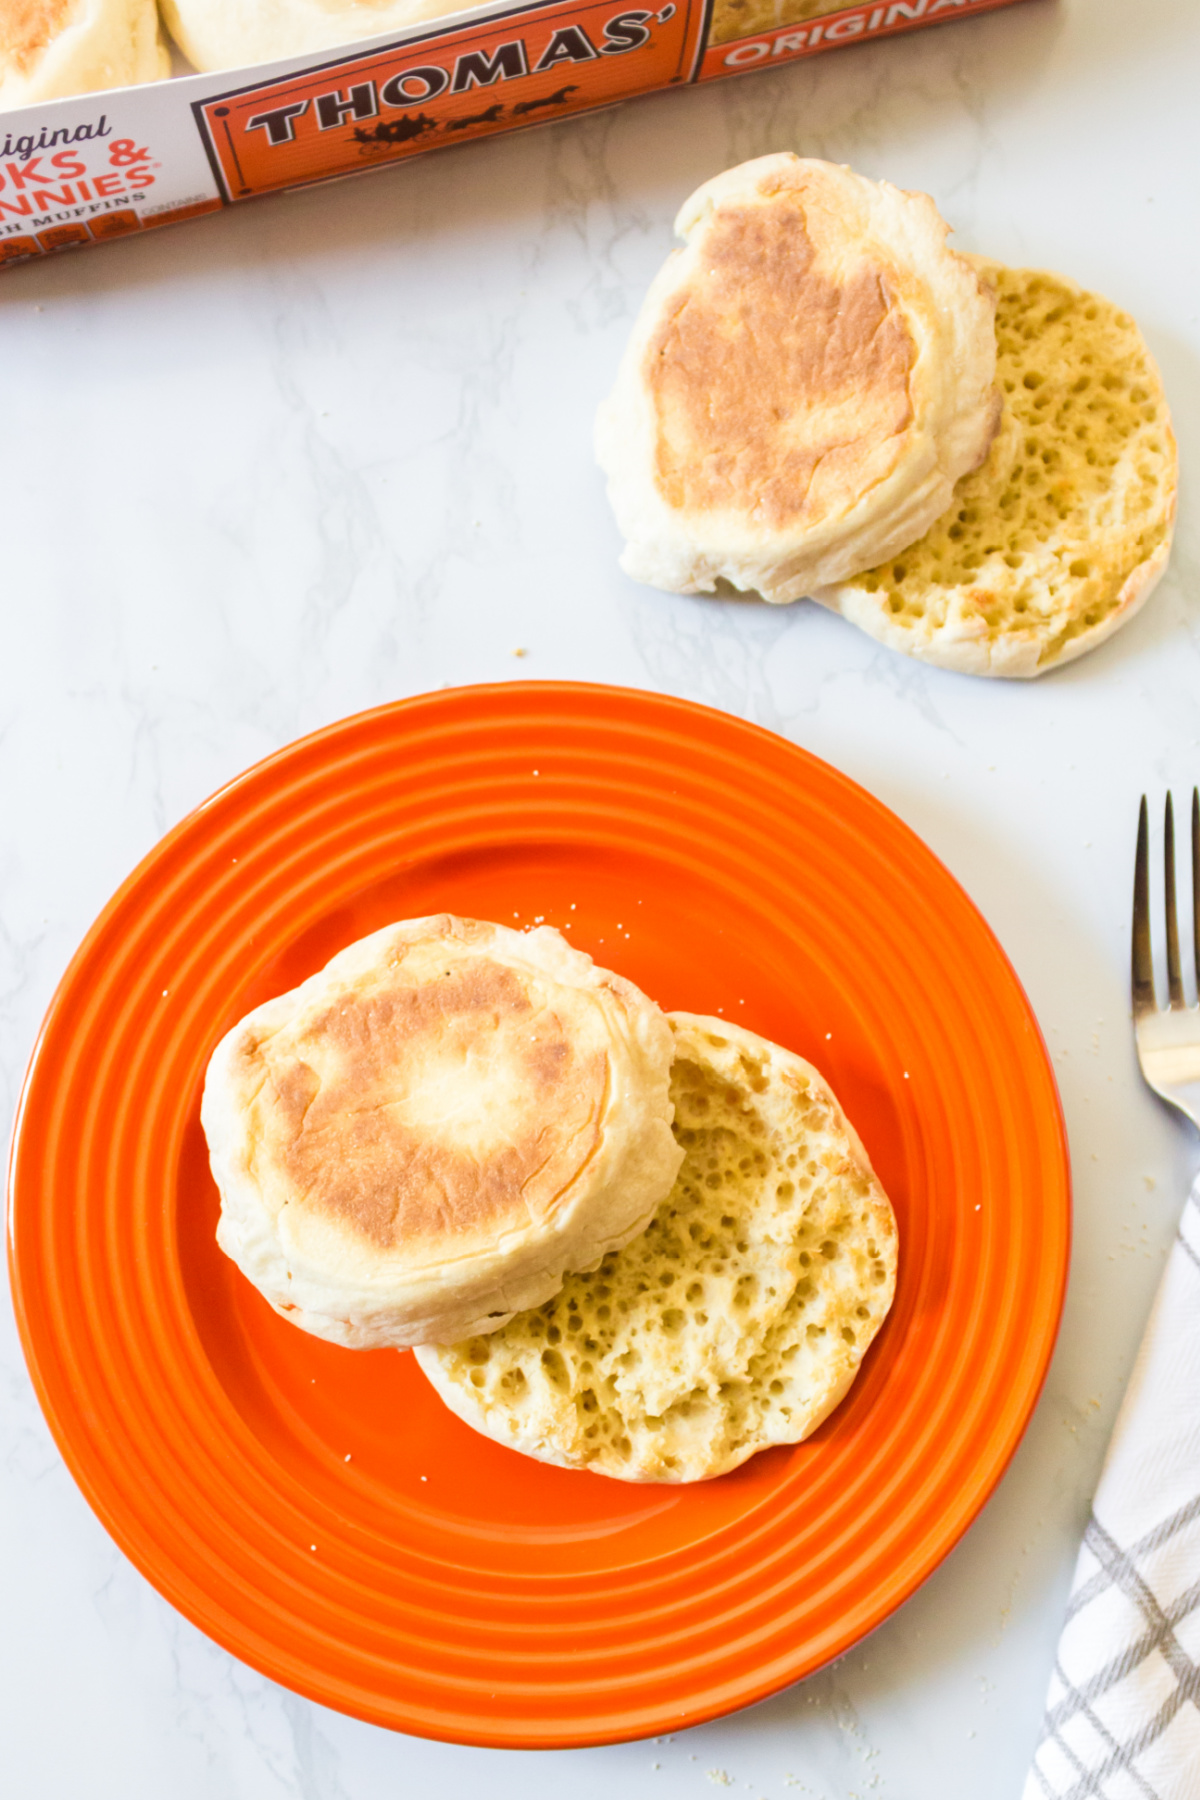 Toasted english muffins on an orange plate with a fork and a pack of thomas' english muffins in the background.